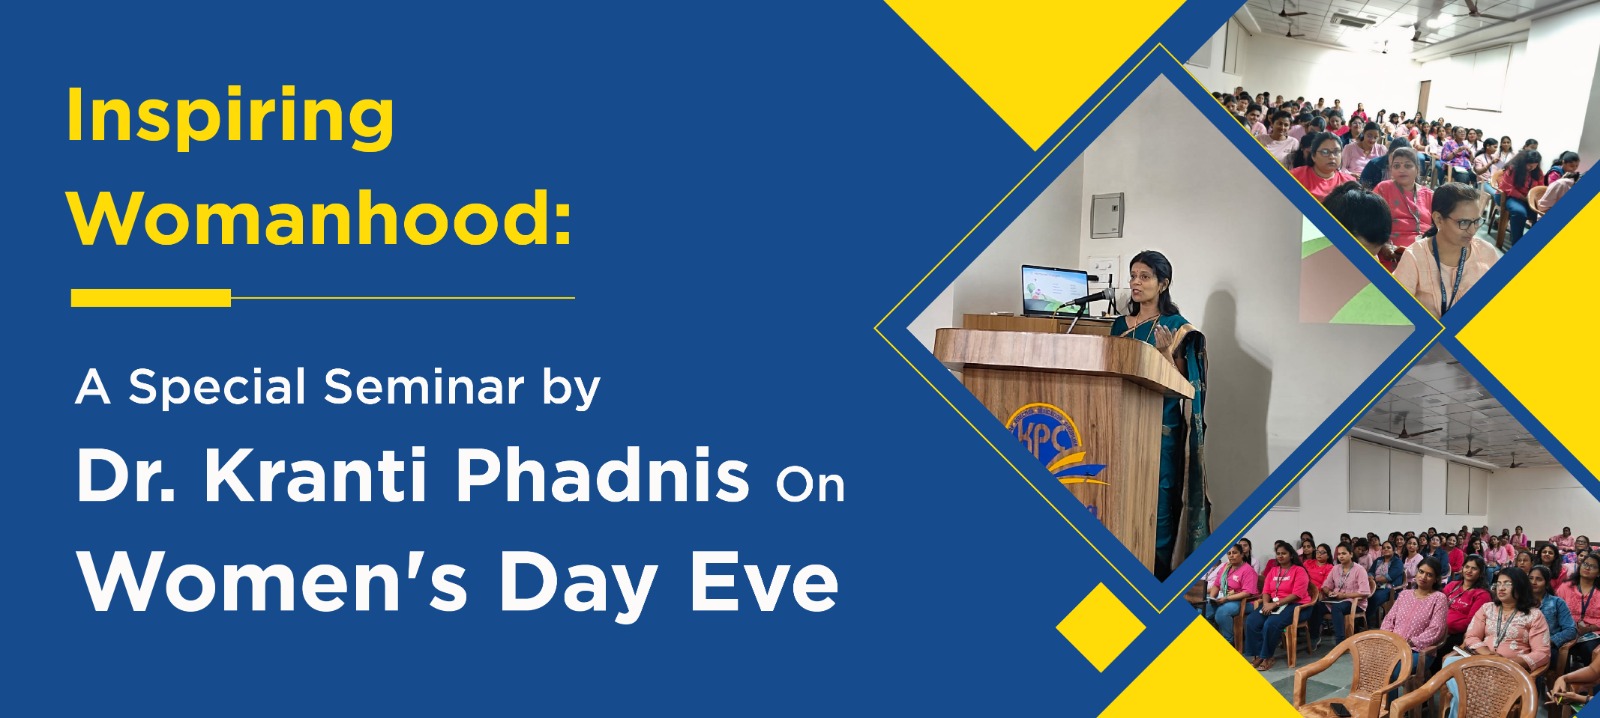 Inspiring Womanhood: A Special Seminar by Dr. Kranti Phadnis on Women's Day Eve